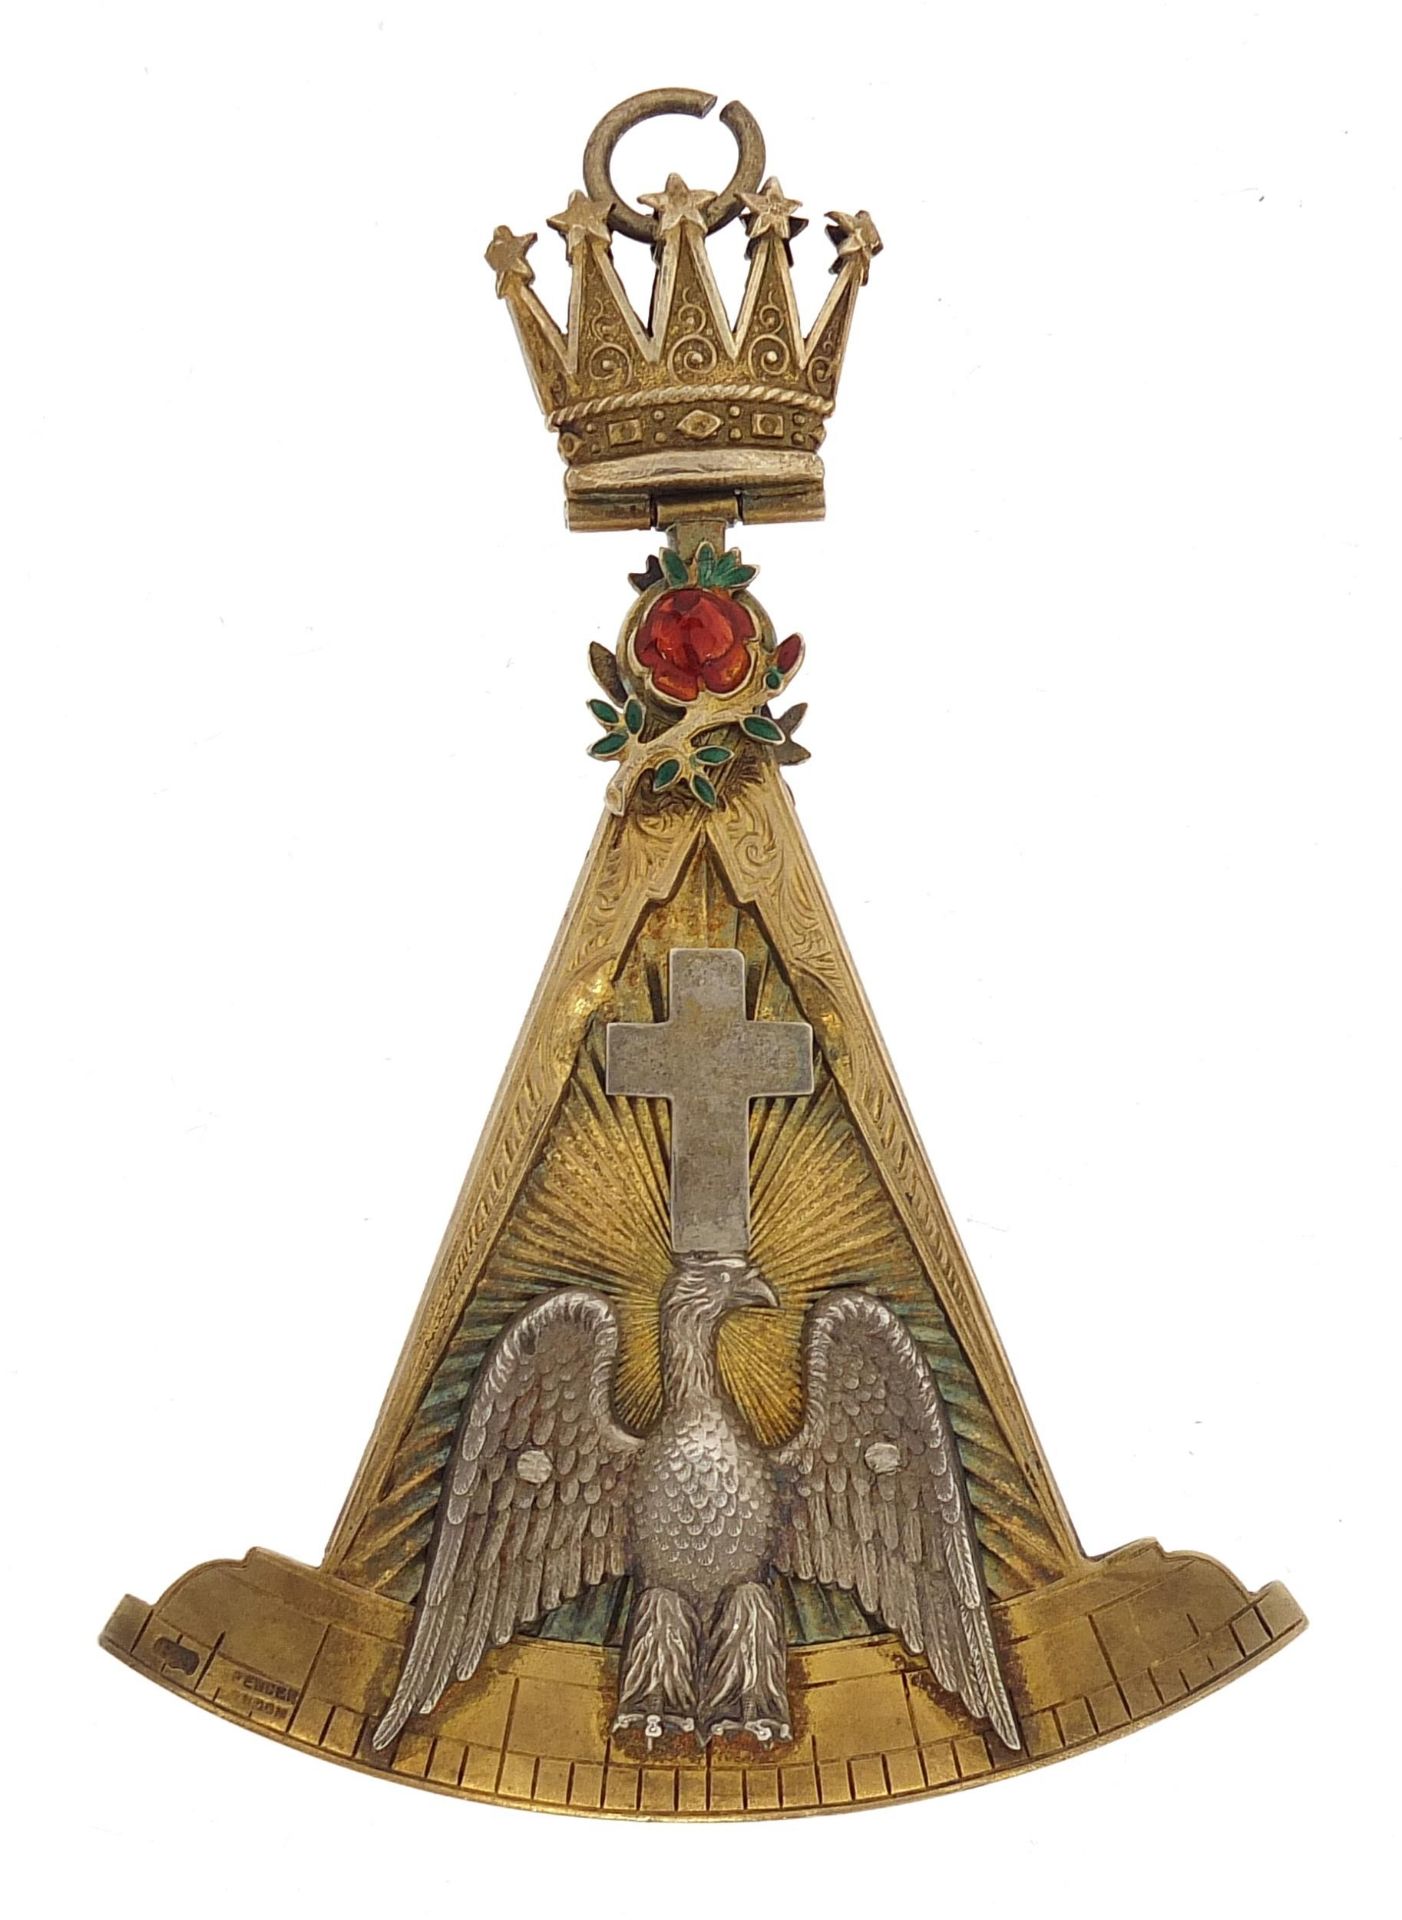 Masonic Rose Croix silver gilt and enamel 18th Degree Collar Jewel, housed in a fitted Spencer & - Image 2 of 5